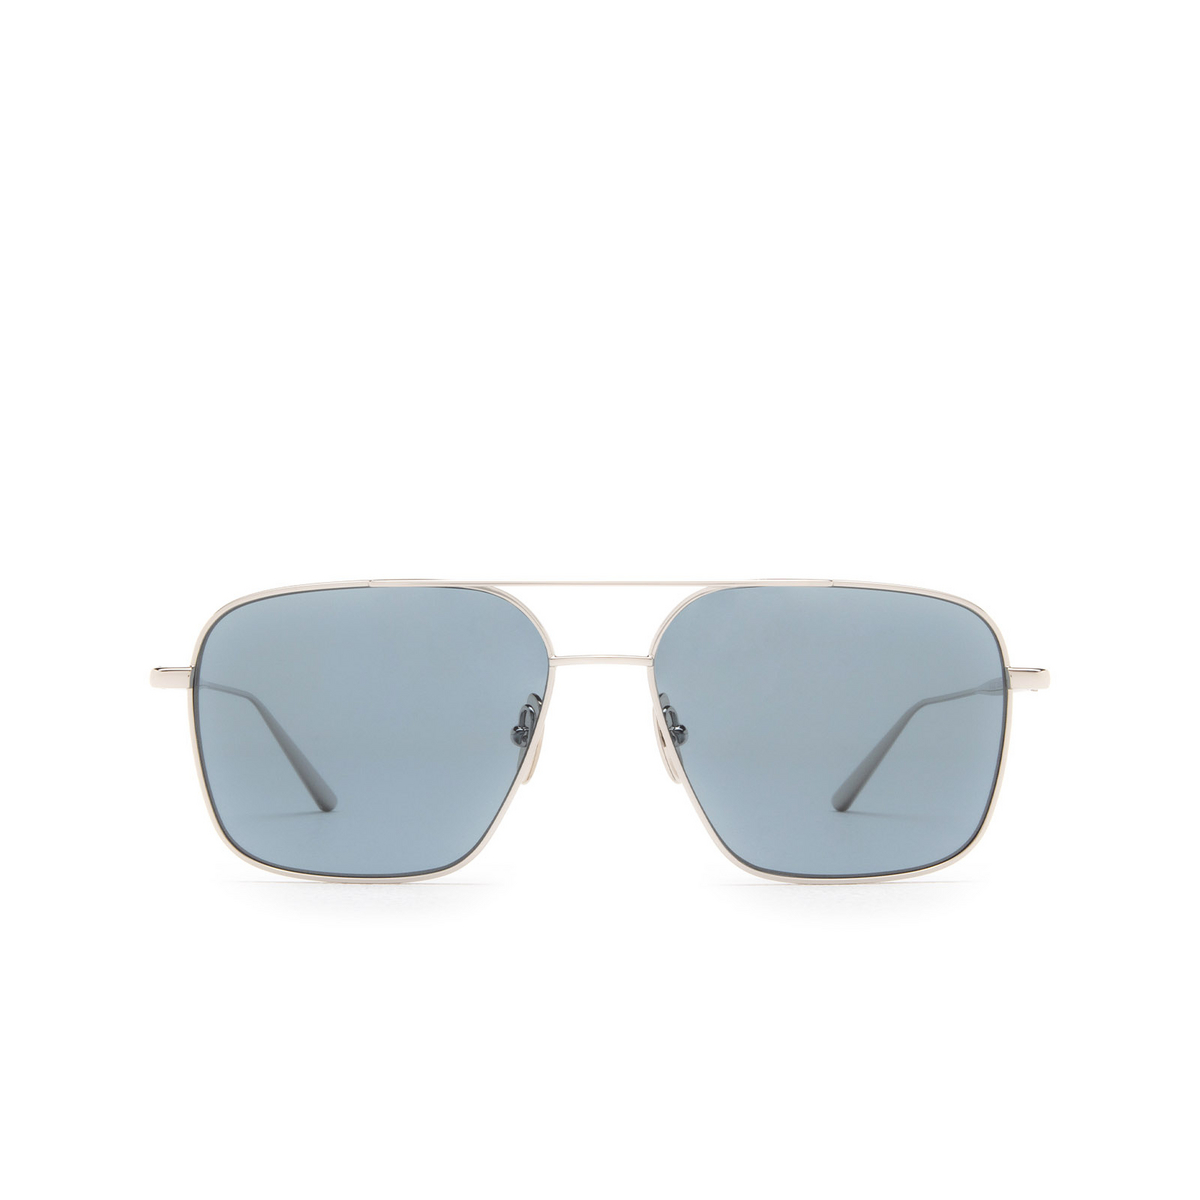 Chimi AVIATOR Sunglasses BLUE - front view